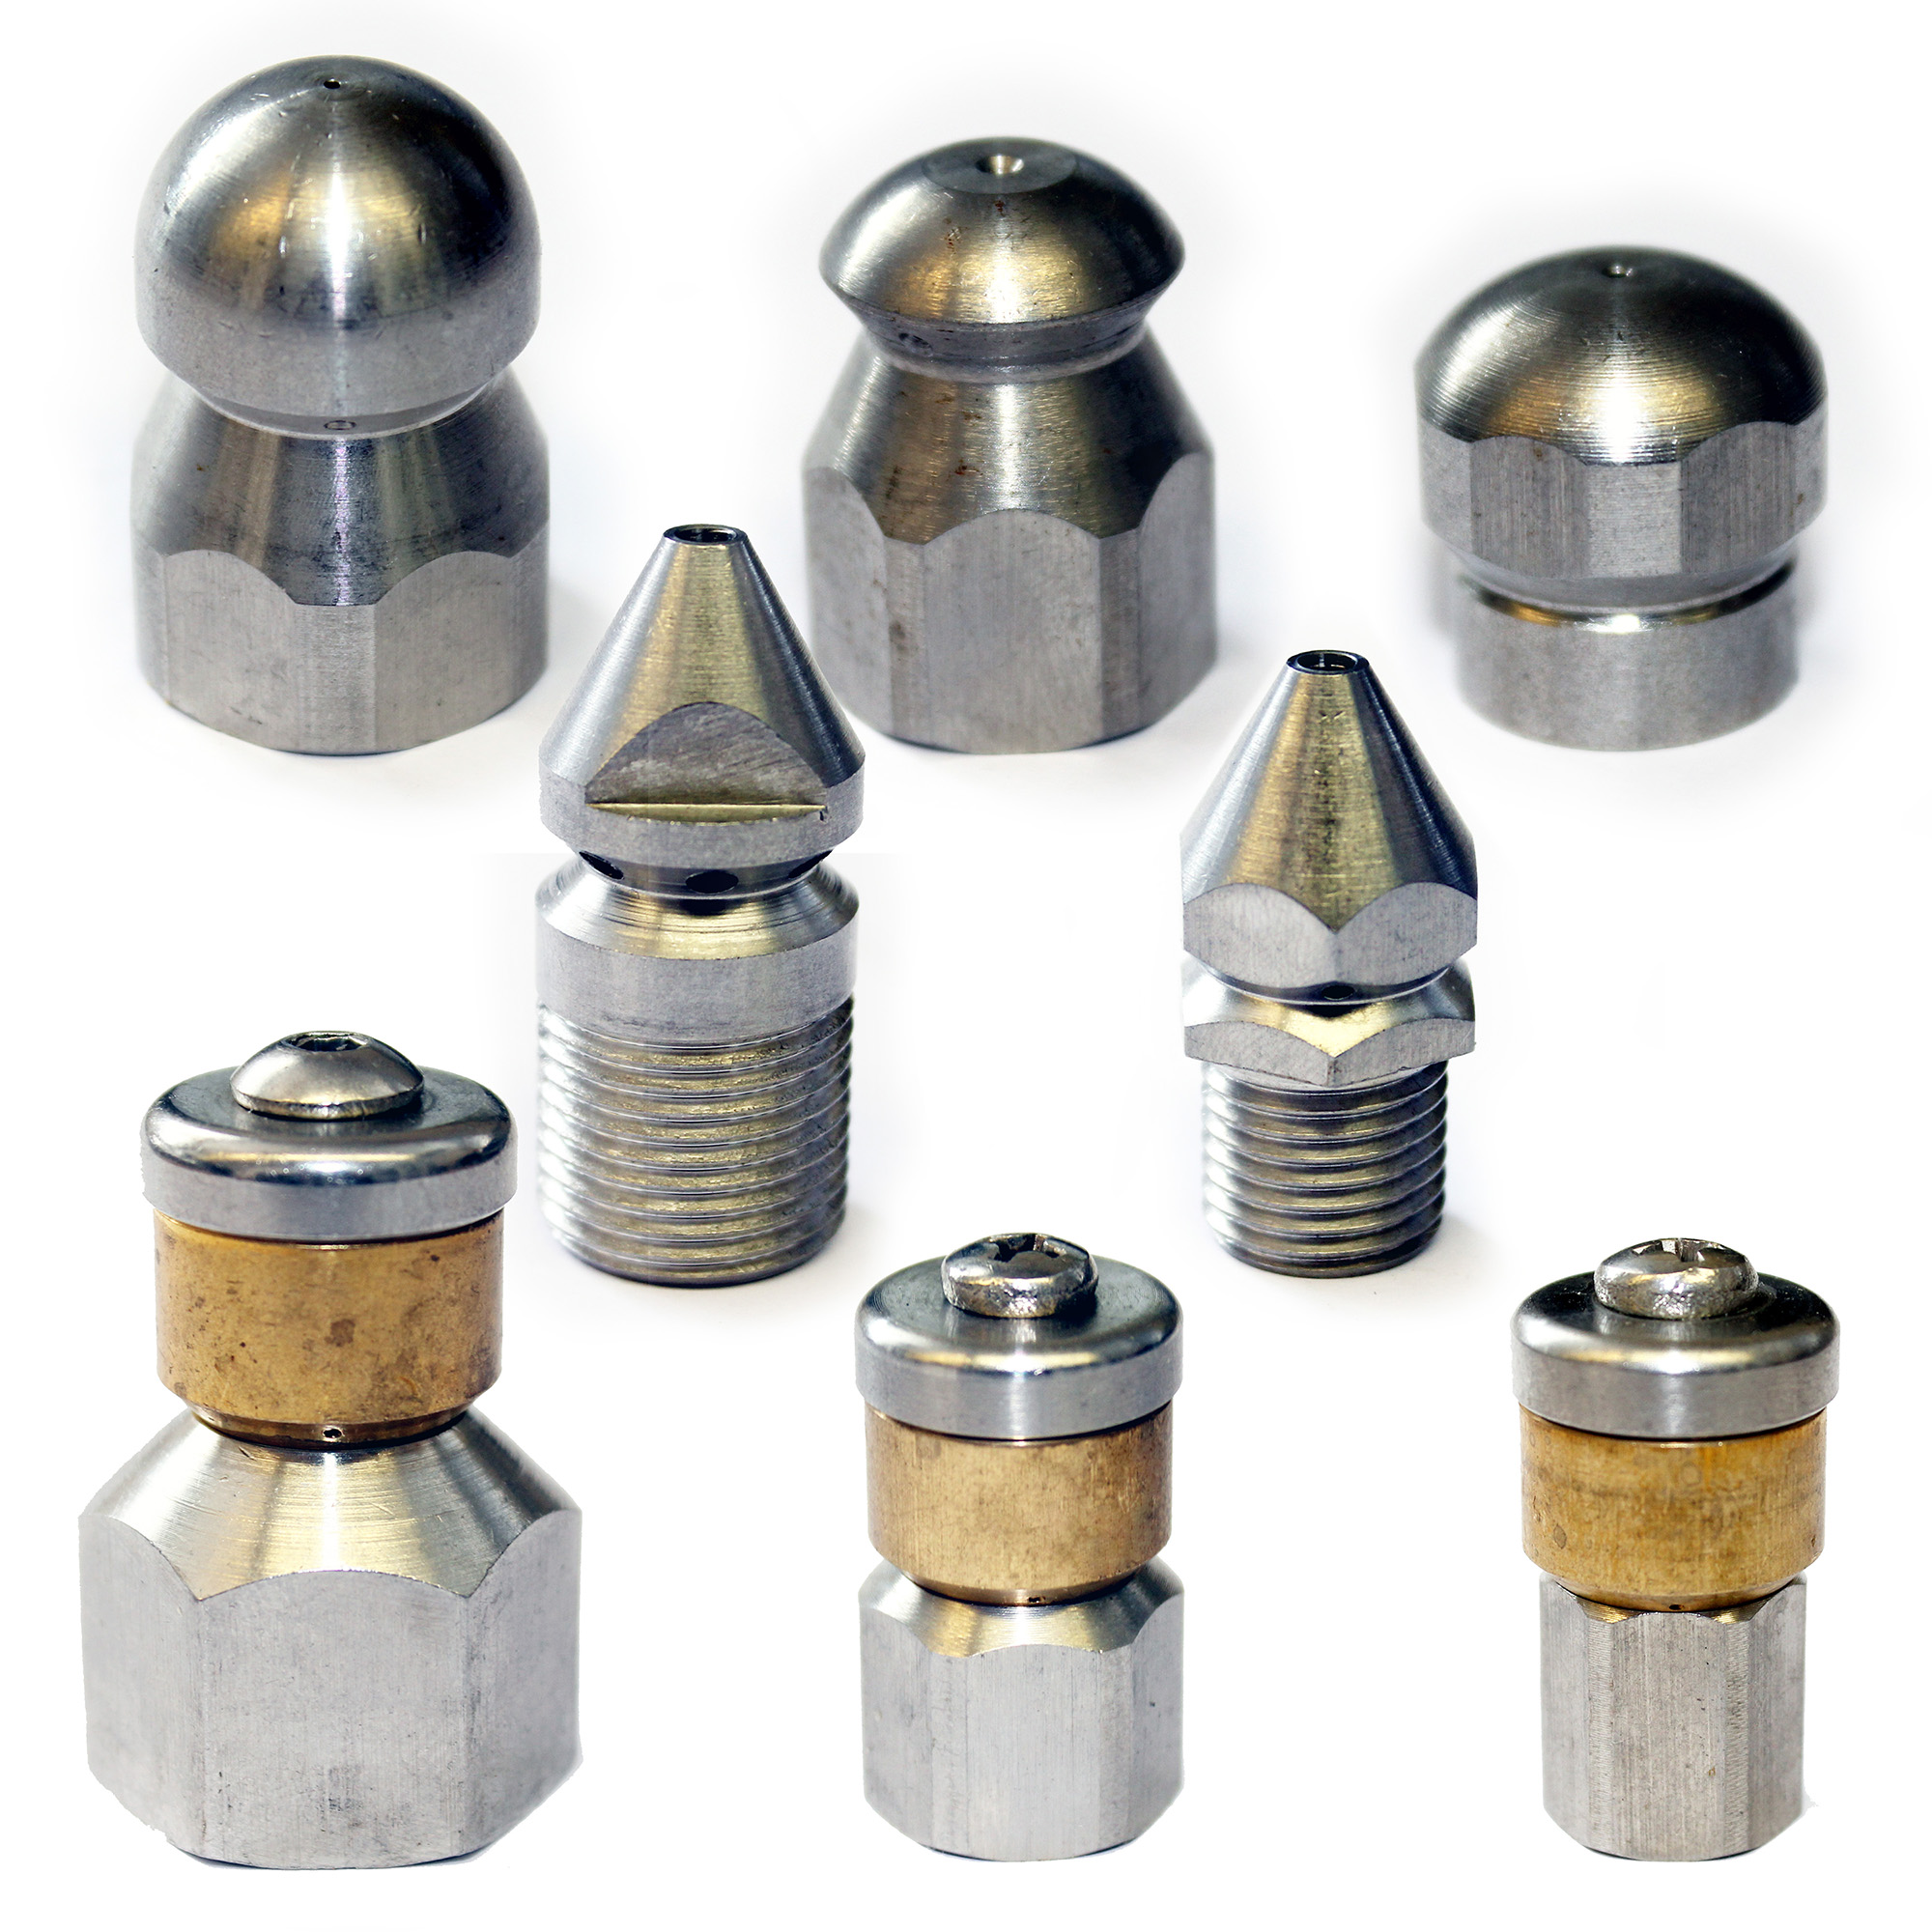 Drain cleaning jet nozzles